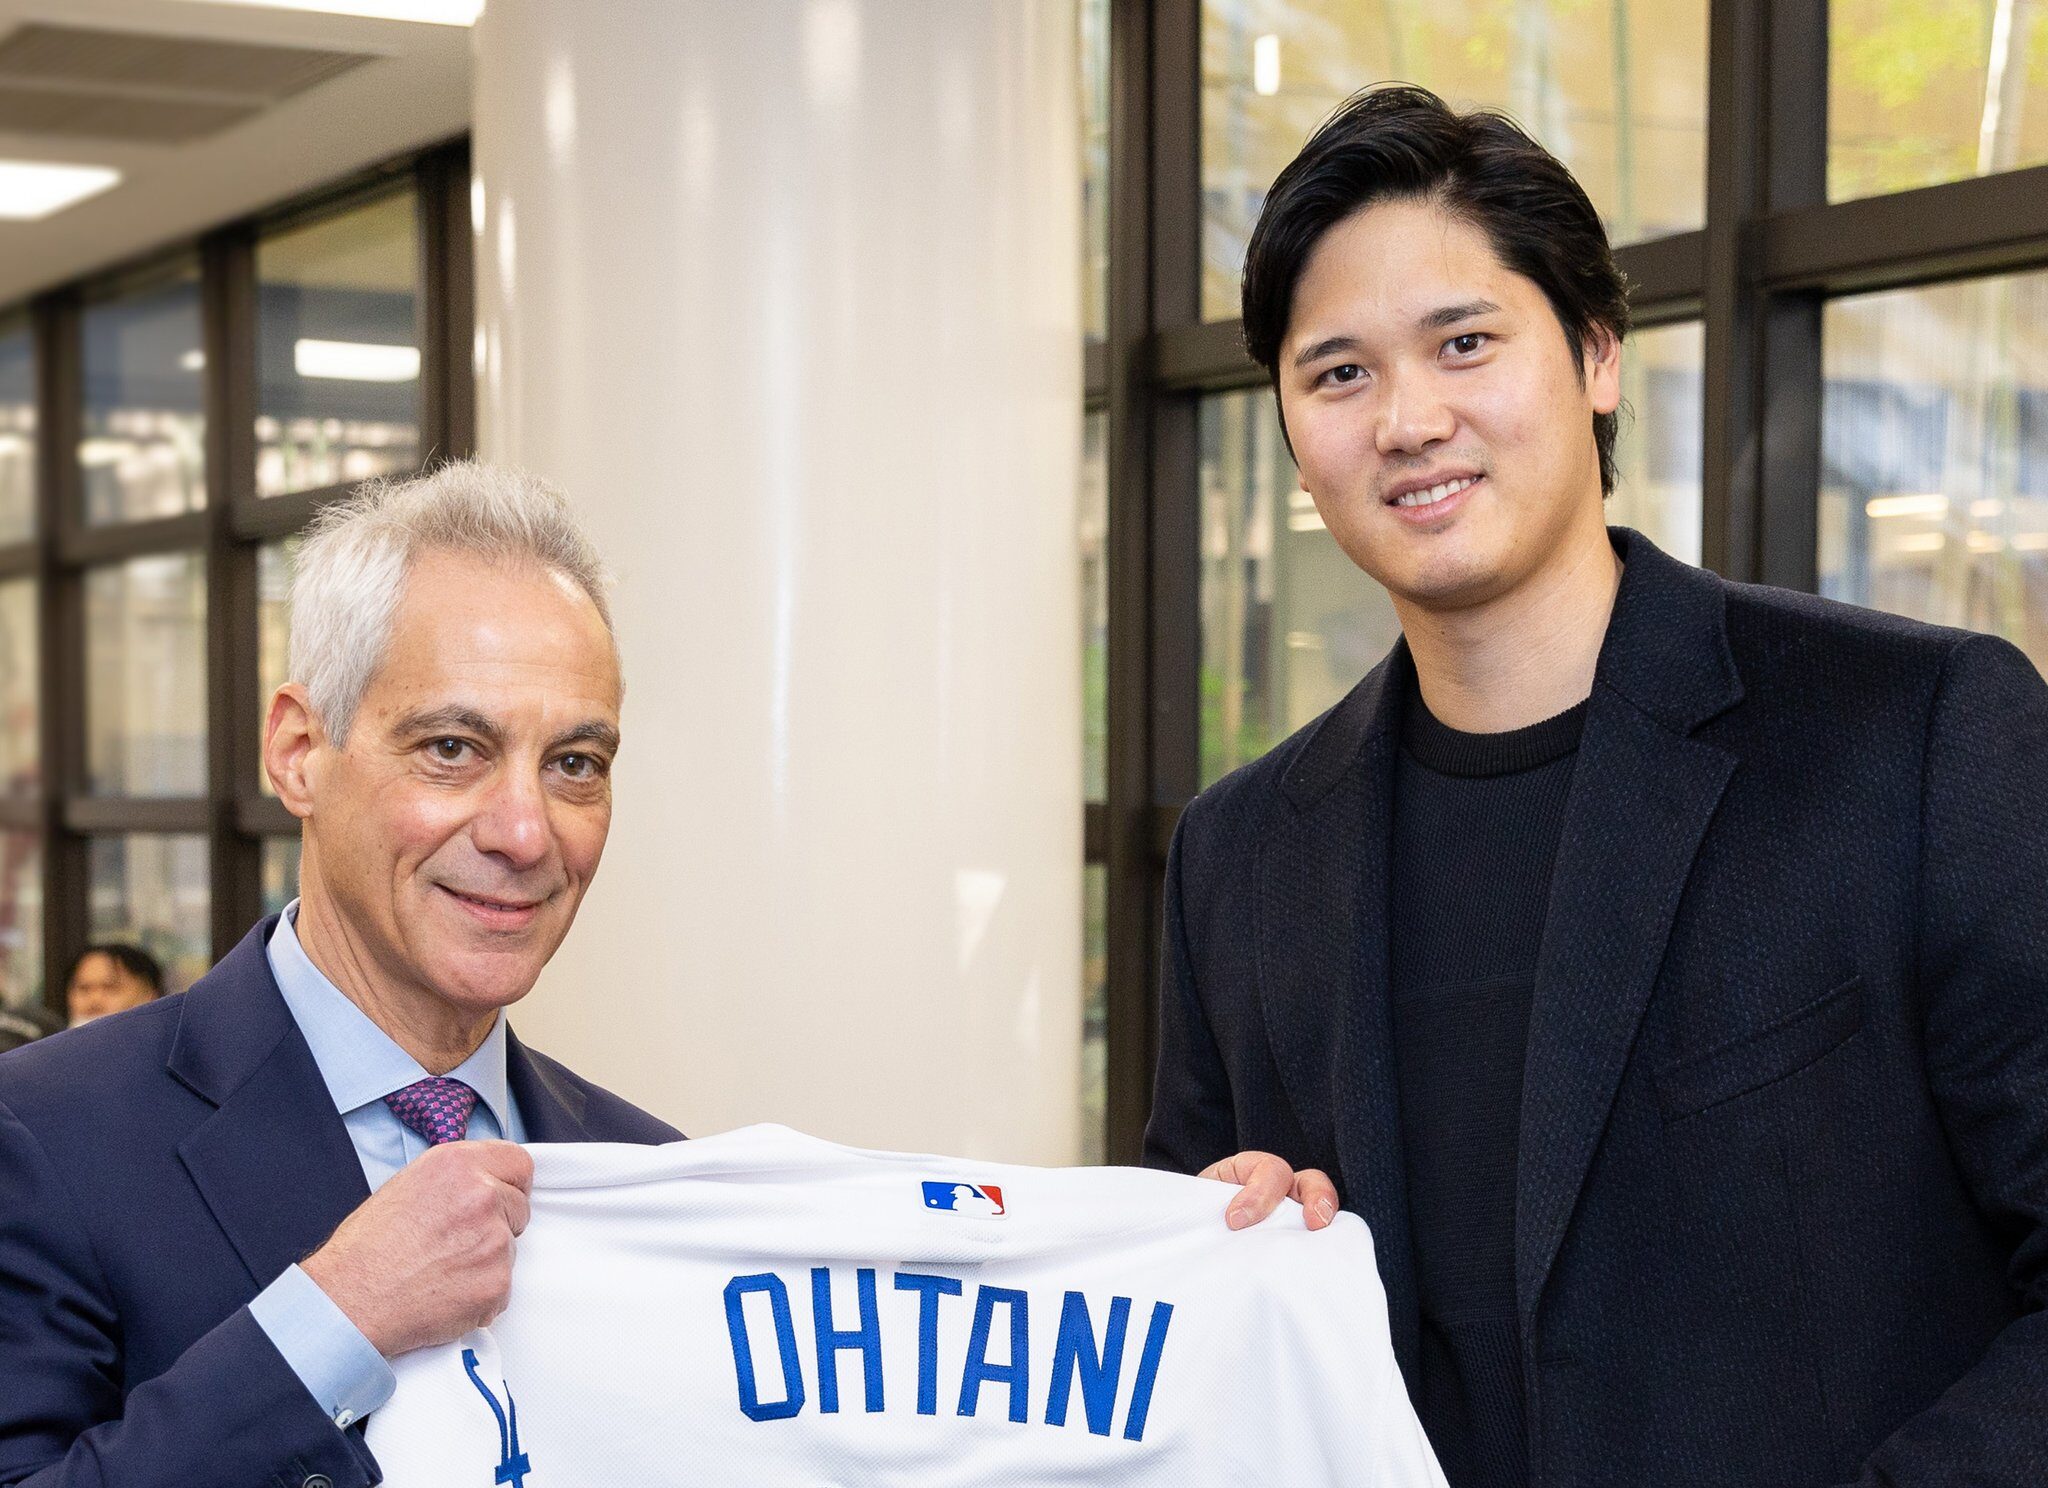 U.S. Ambassador to Japan Rahm Emanuel and Shohei Ohtani in Tokyo earlier this year after Ohtani announced he had joined the Dodgers